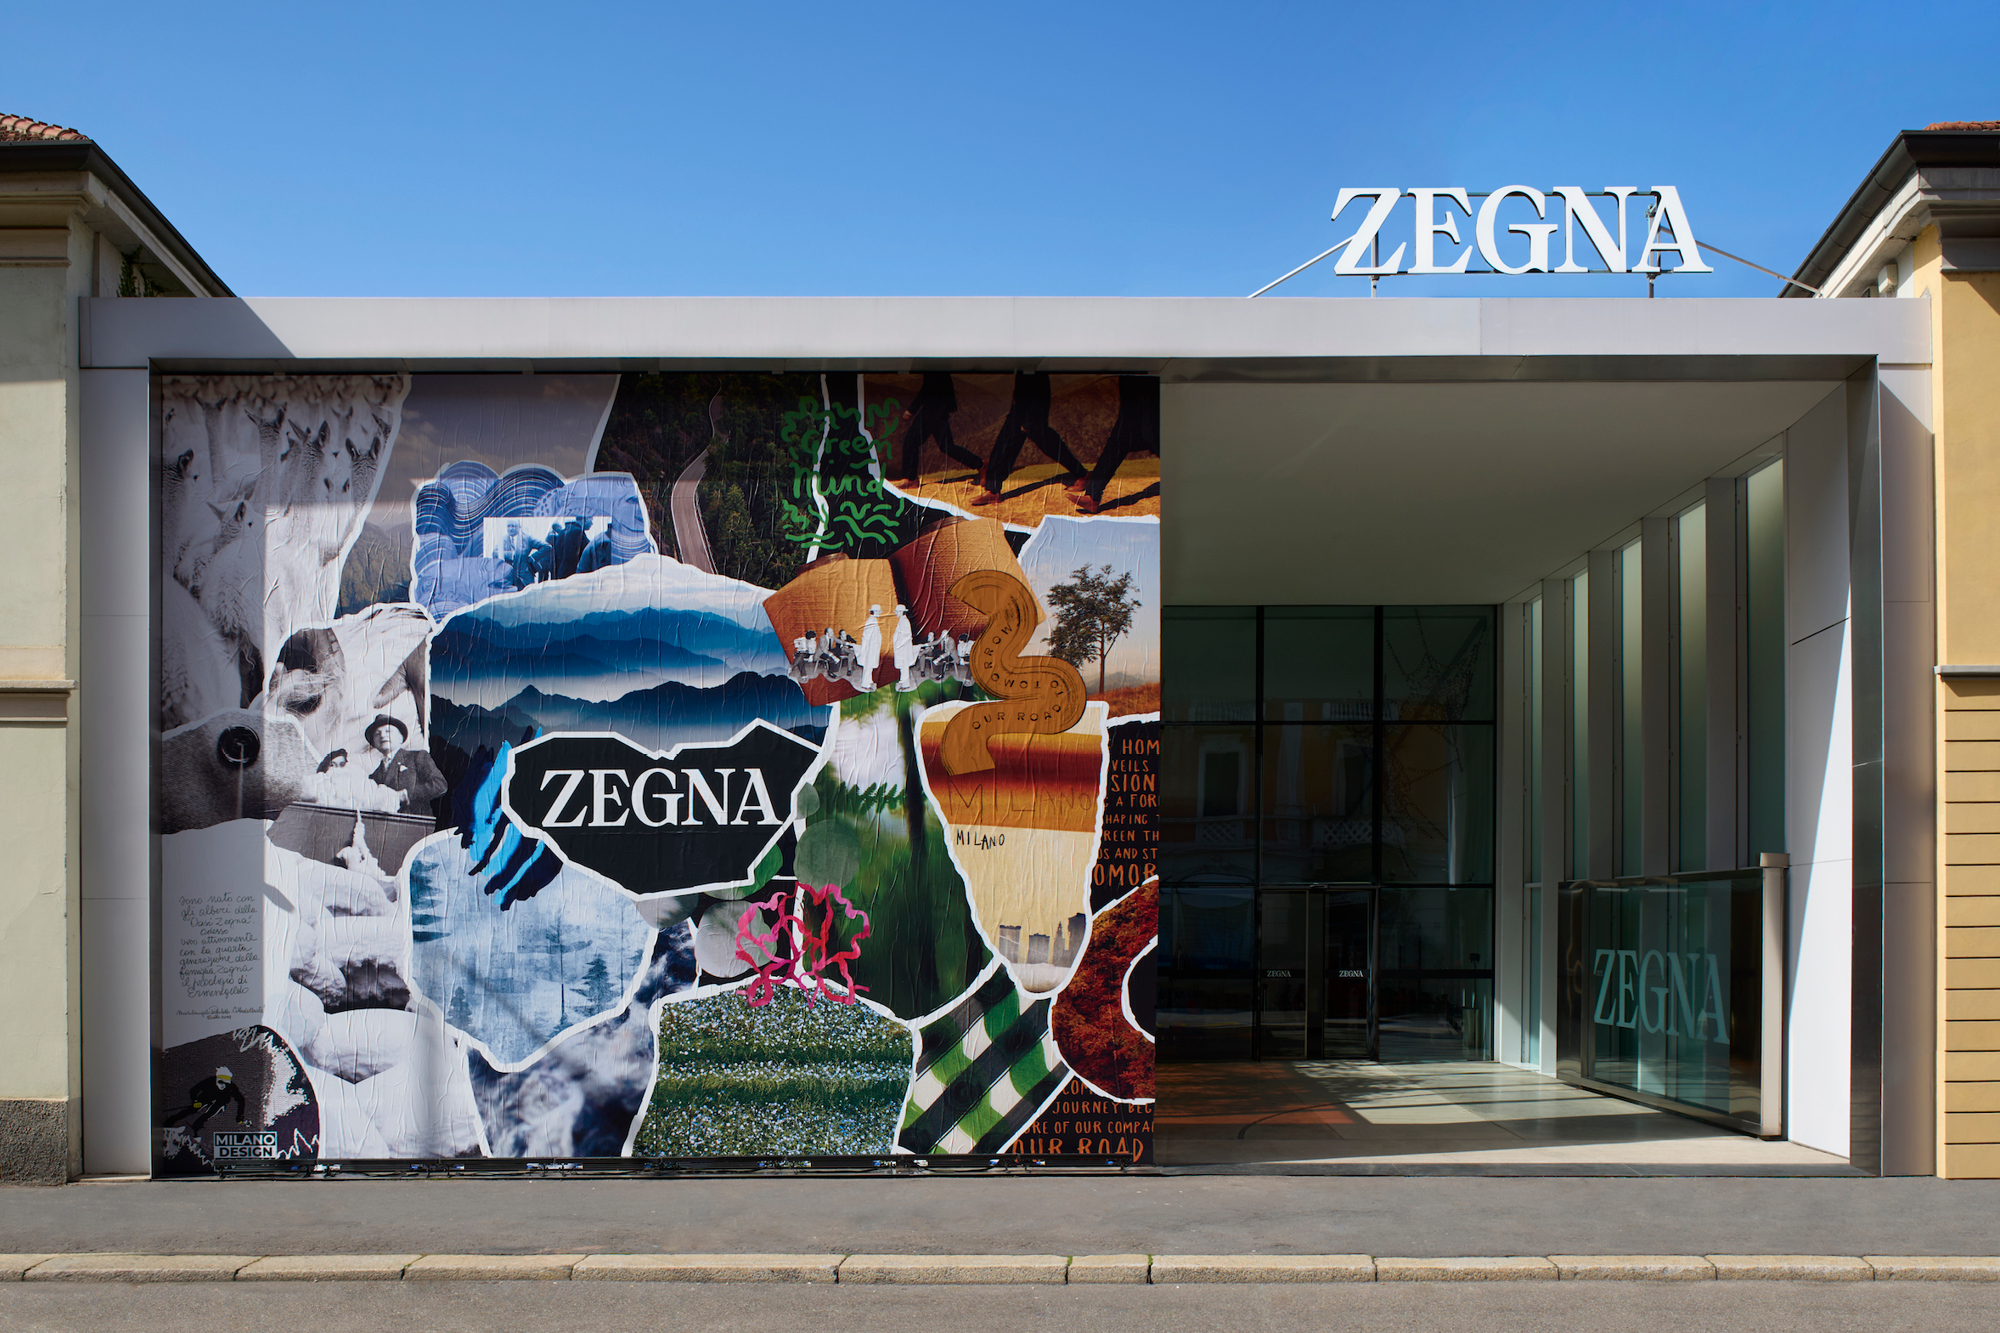 Born in Oasi Zegna Book Installation at Zegna's HQ in Milan